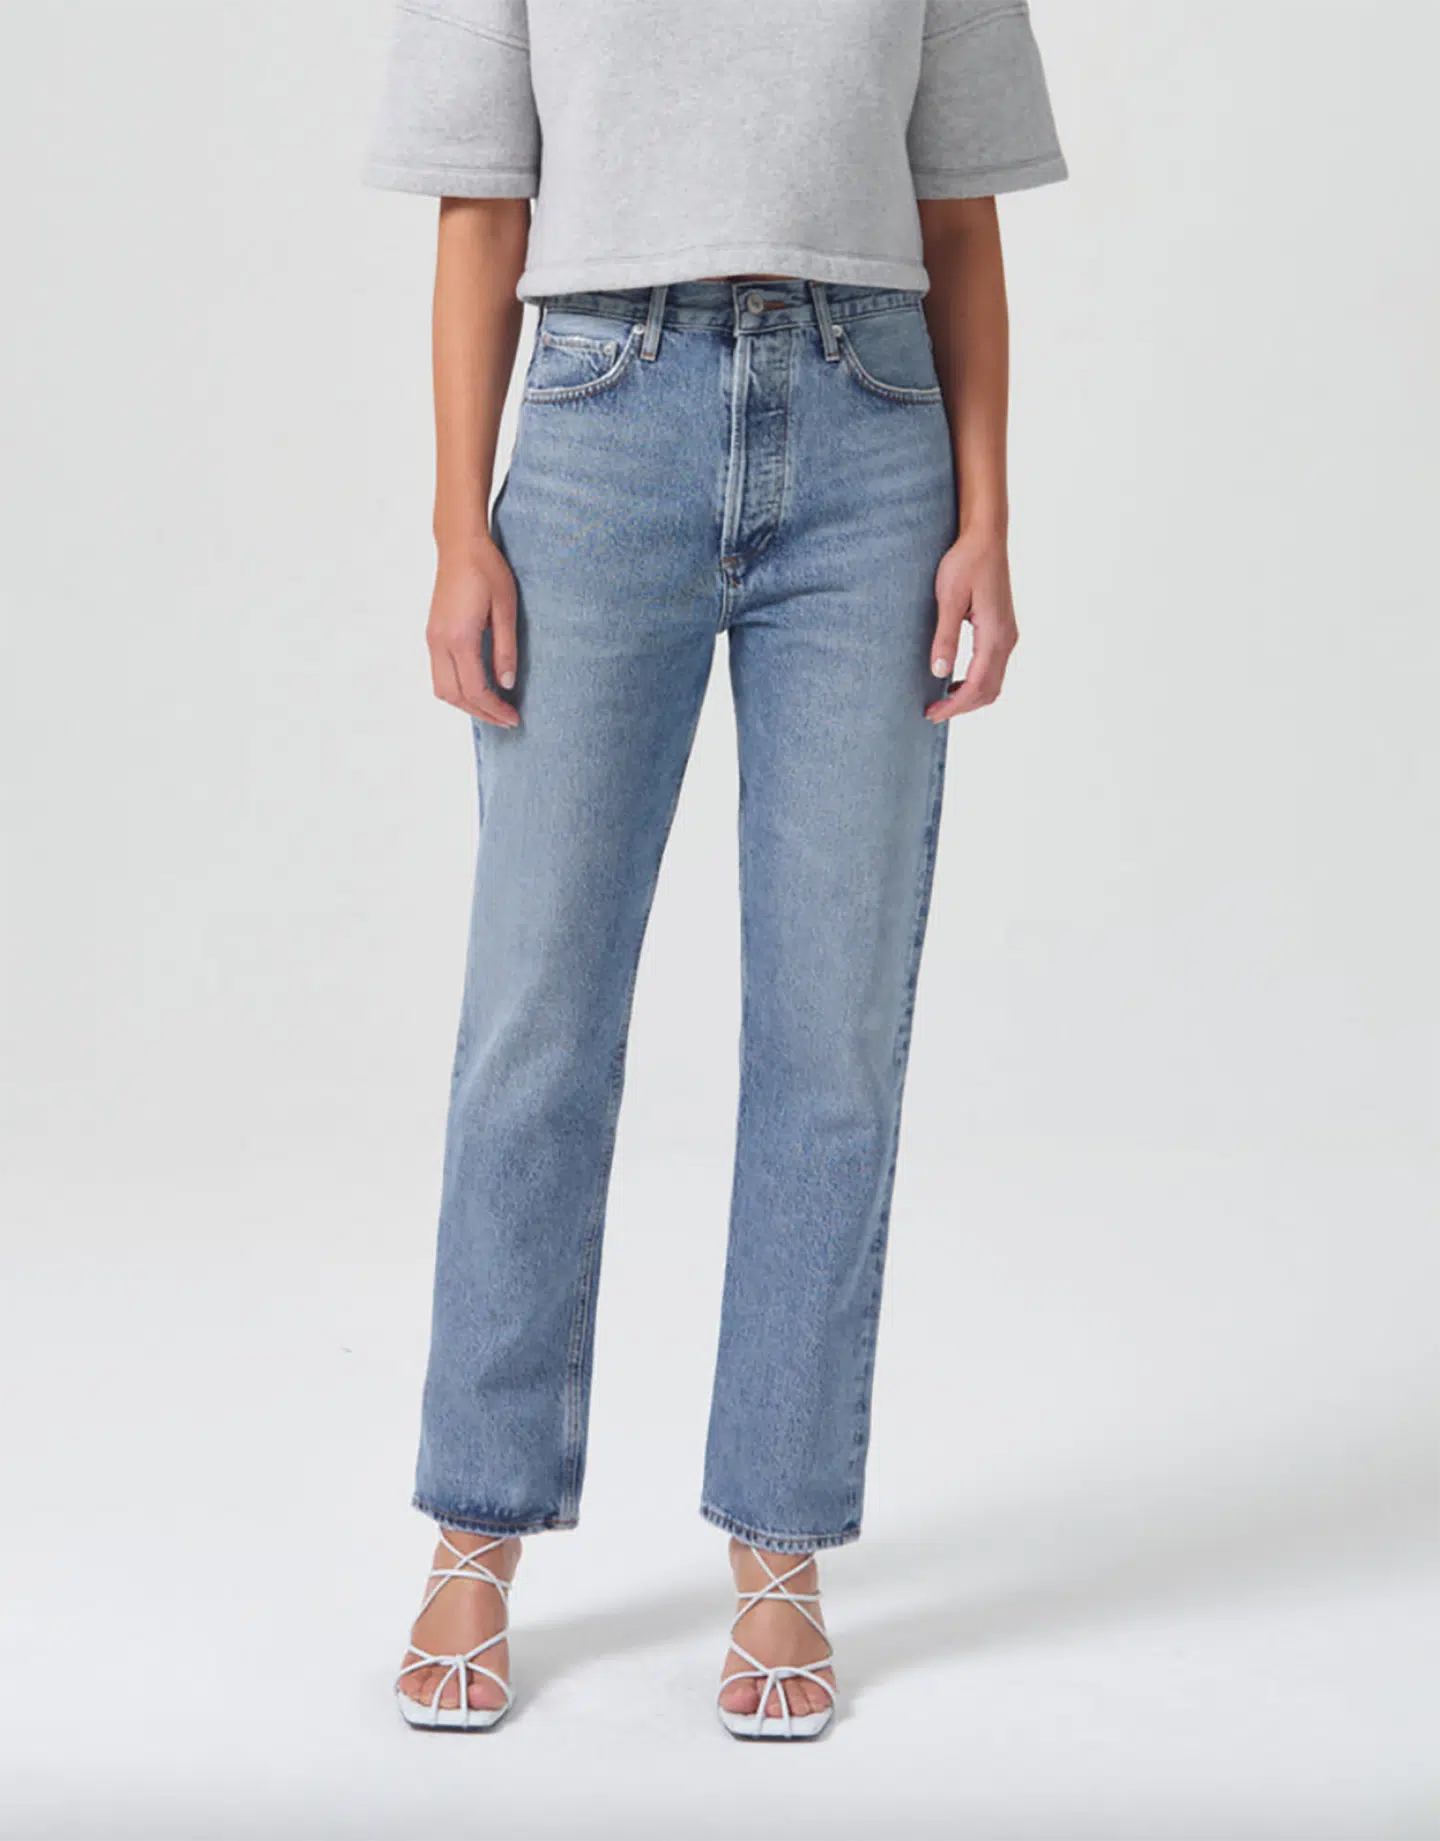 My honest thoughts on Agolde jeans, by fashion blogger What The Fab